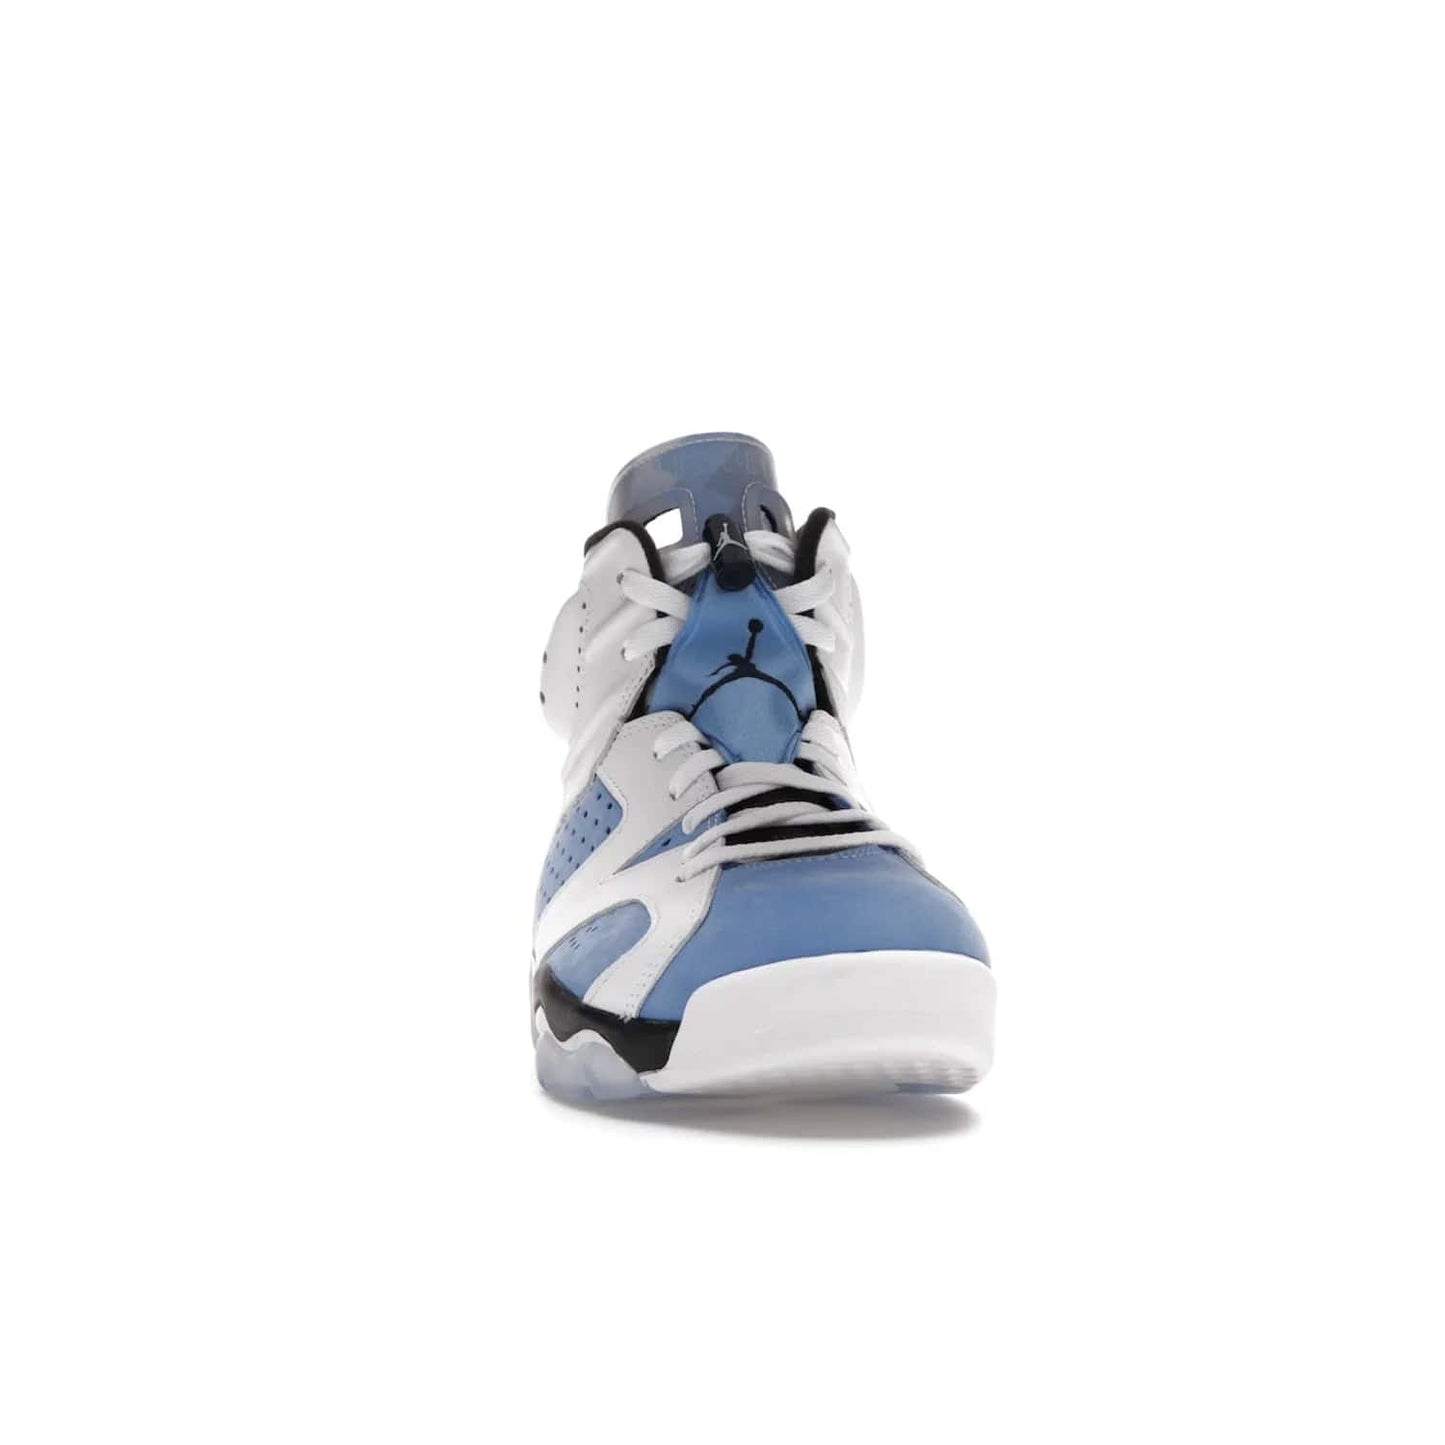 Jordan 6 Retro UNC White - Image 9 - Only at www.BallersClubKickz.com - Air Jordan 6 Retro UNC White with classic UNC colors brings nostalgia and style to a legendary silhouette. Celebrate MJ's alma mater with navy blue accents, icy semi-translucent sole and Jordan Team patch. Out March 2022 for the Sneaker Enthusiast.